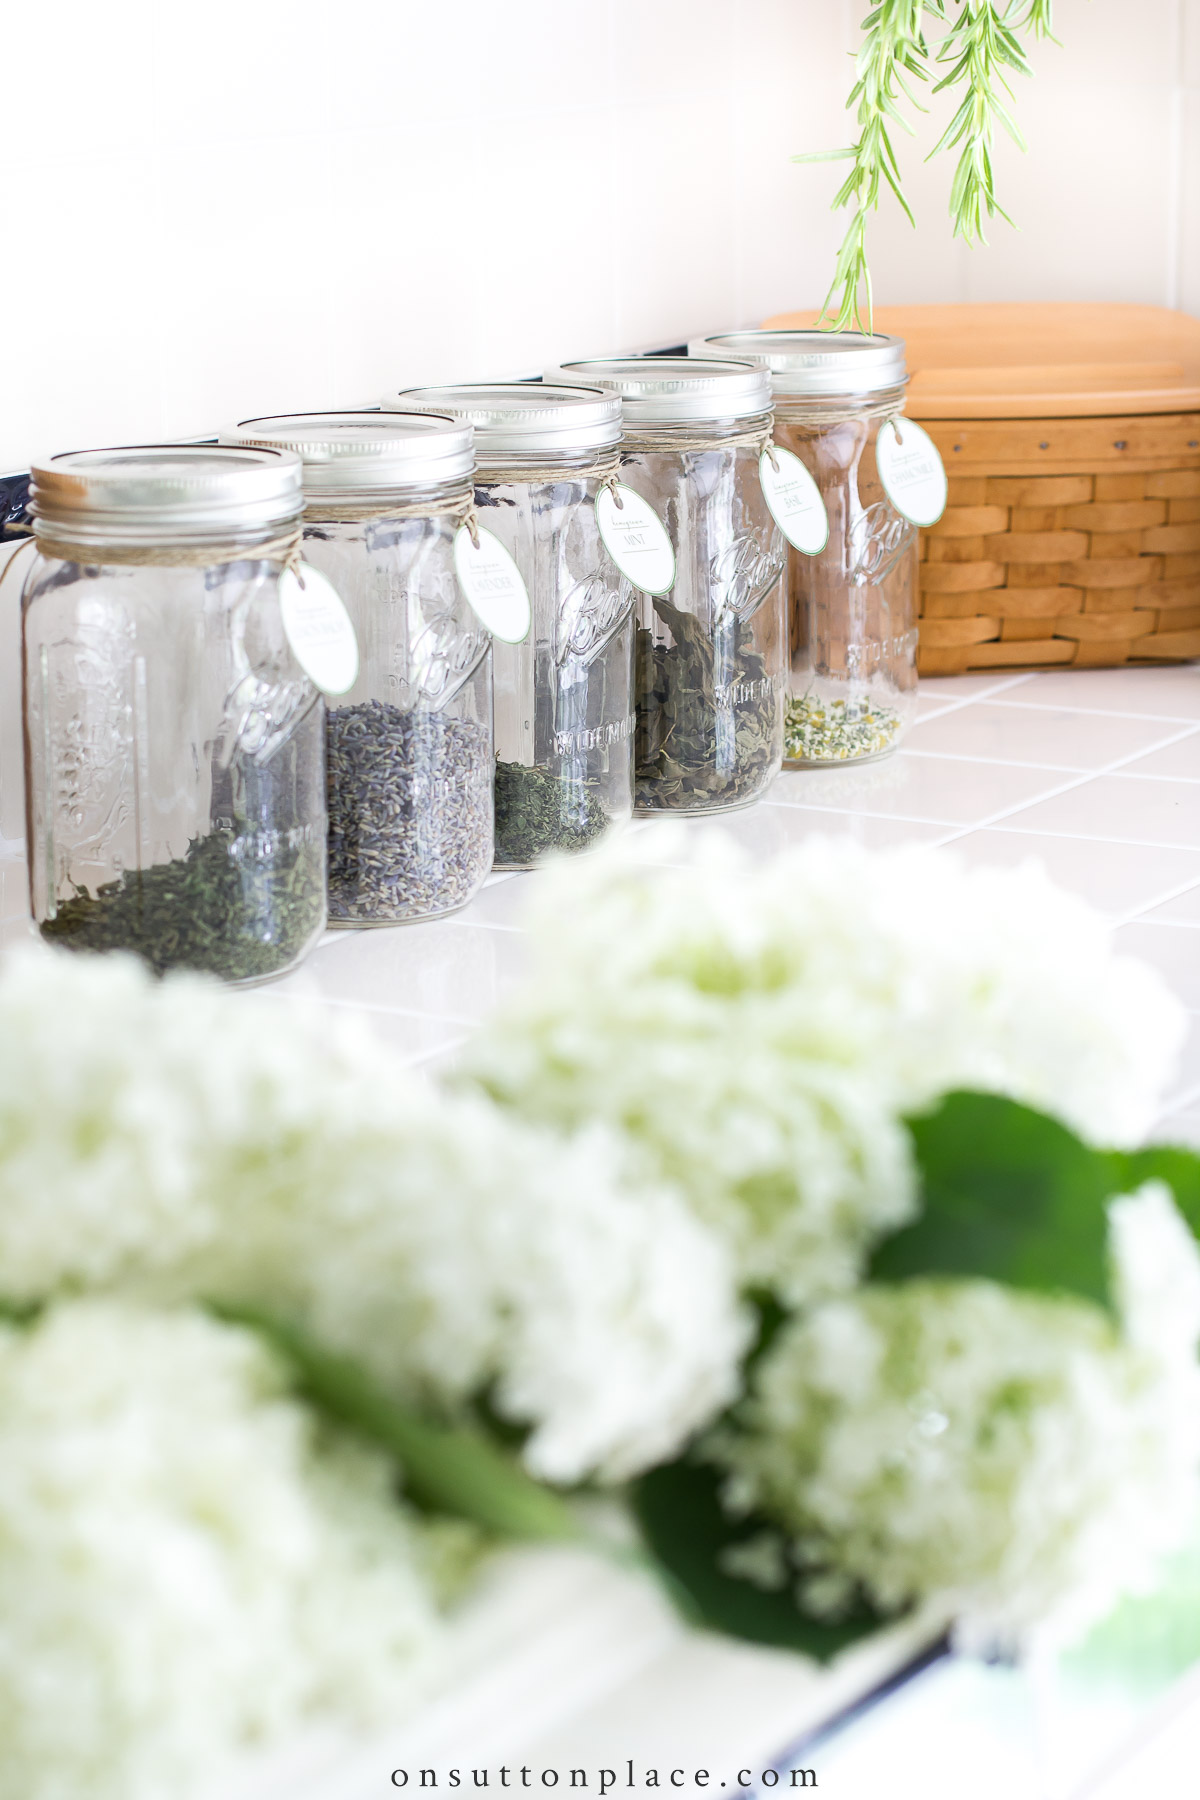 https://www.onsuttonplace.com/wp-content/uploads/2019/02/dried-herbs-stored-in-mason-jars-on-countertop-2022.jpg